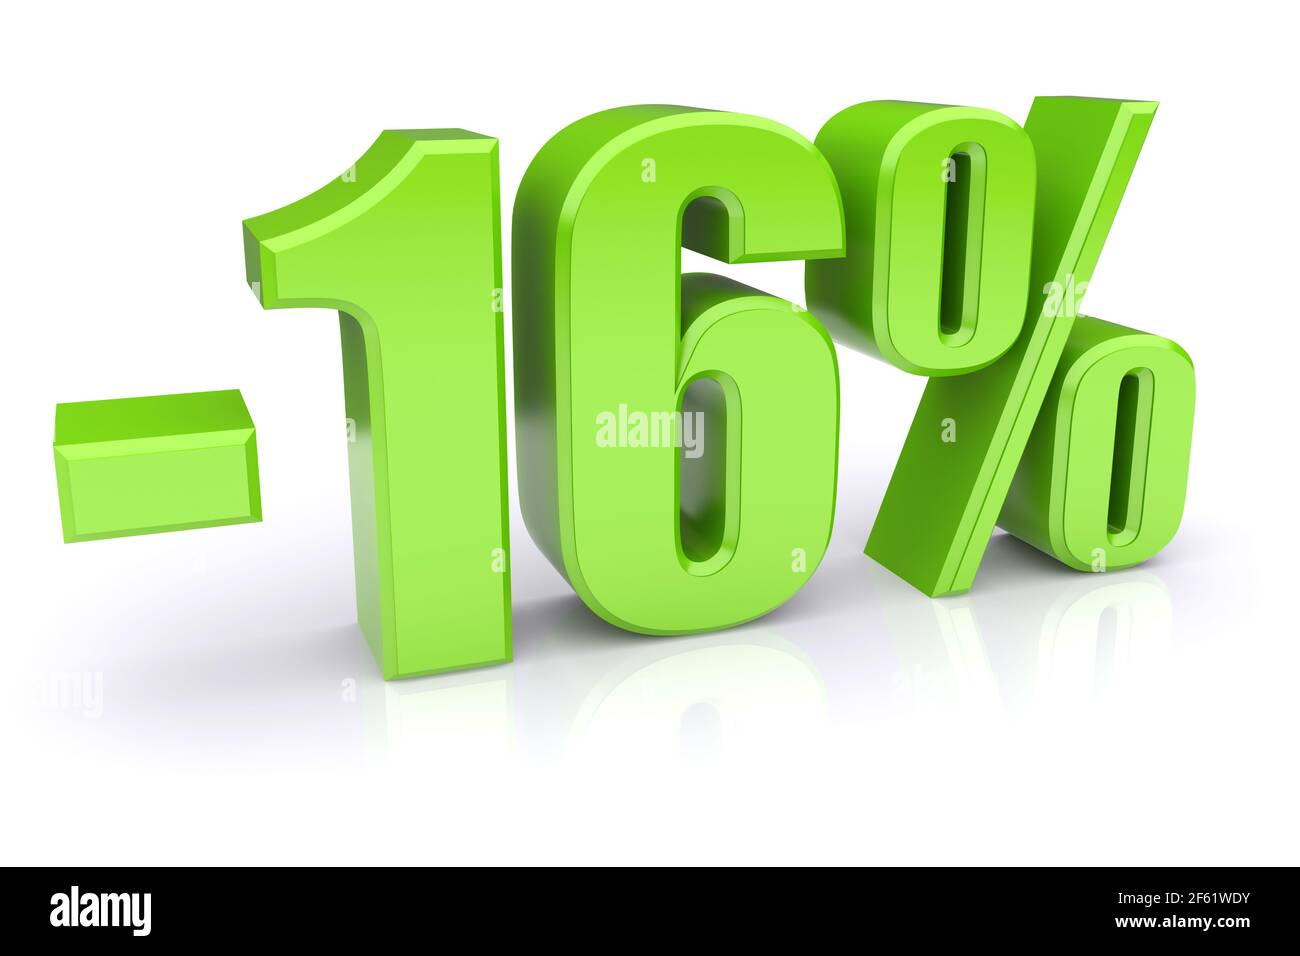 Green 16% discount icon on a white background. 3d rendered image Stock Photo